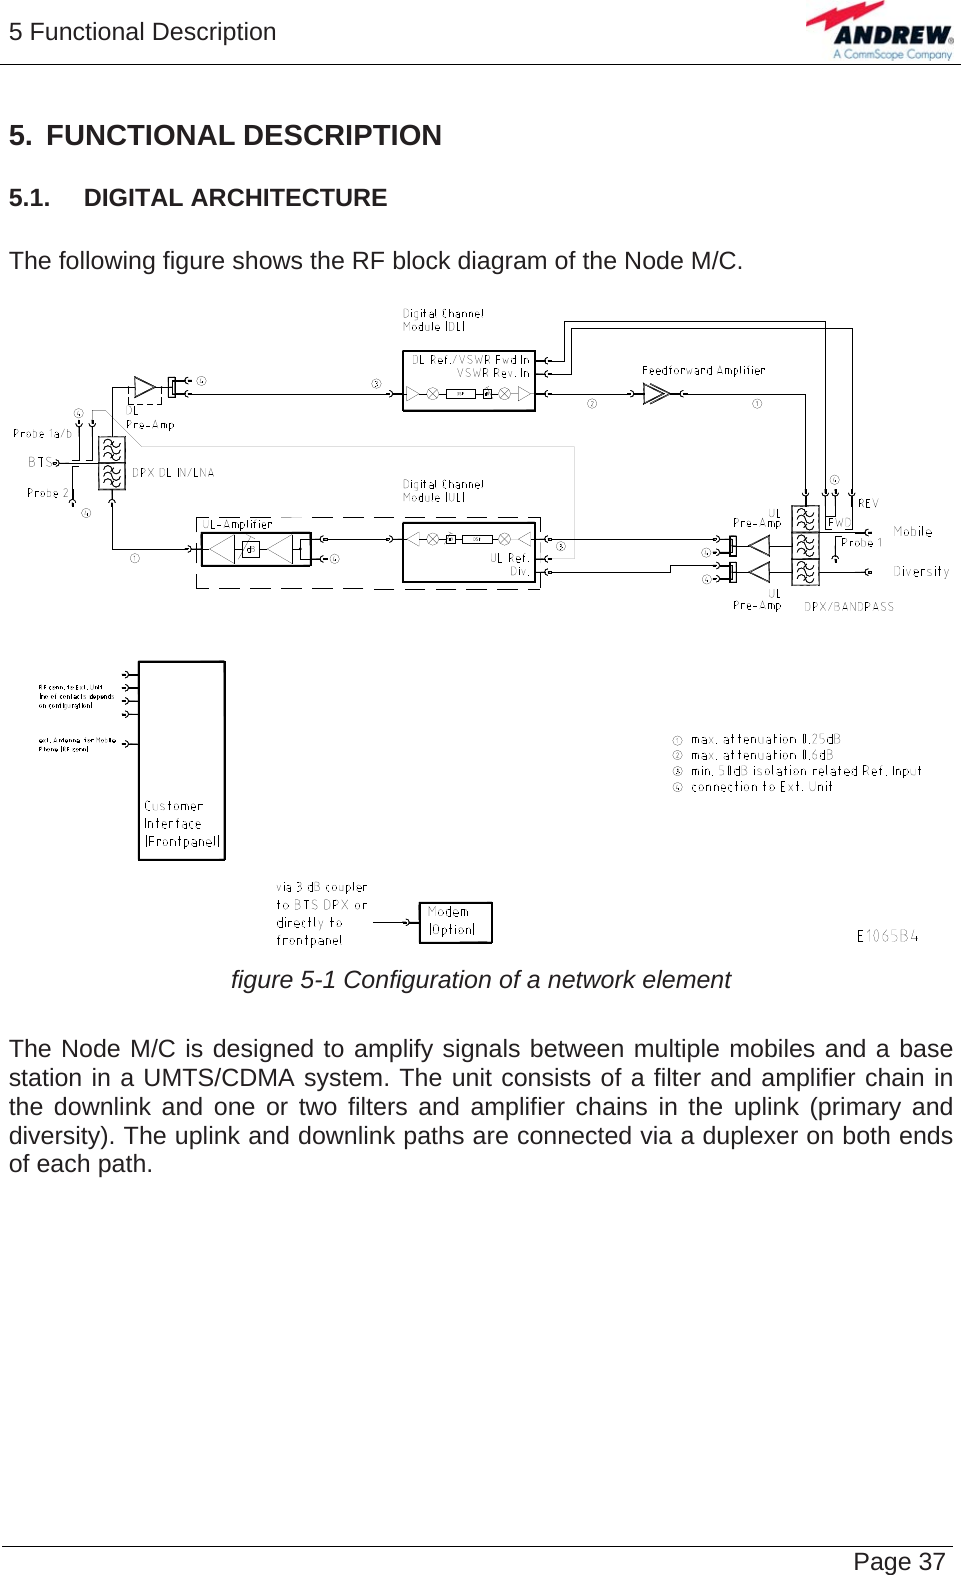 5 Functional Description   Page 375. FUNCTIONAL DESCRIPTION 5.1.  DIGITAL ARCHITECTURE  The following figure shows the RF block diagram of the Node M/C.   figure 5-1 Configuration of a network element  The Node M/C is designed to amplify signals between multiple mobiles and a base station in a UMTS/CDMA system. The unit consists of a filter and amplifier chain in the downlink and one or two filters and amplifier chains in the uplink (primary and diversity). The uplink and downlink paths are connected via a duplexer on both ends of each path.  